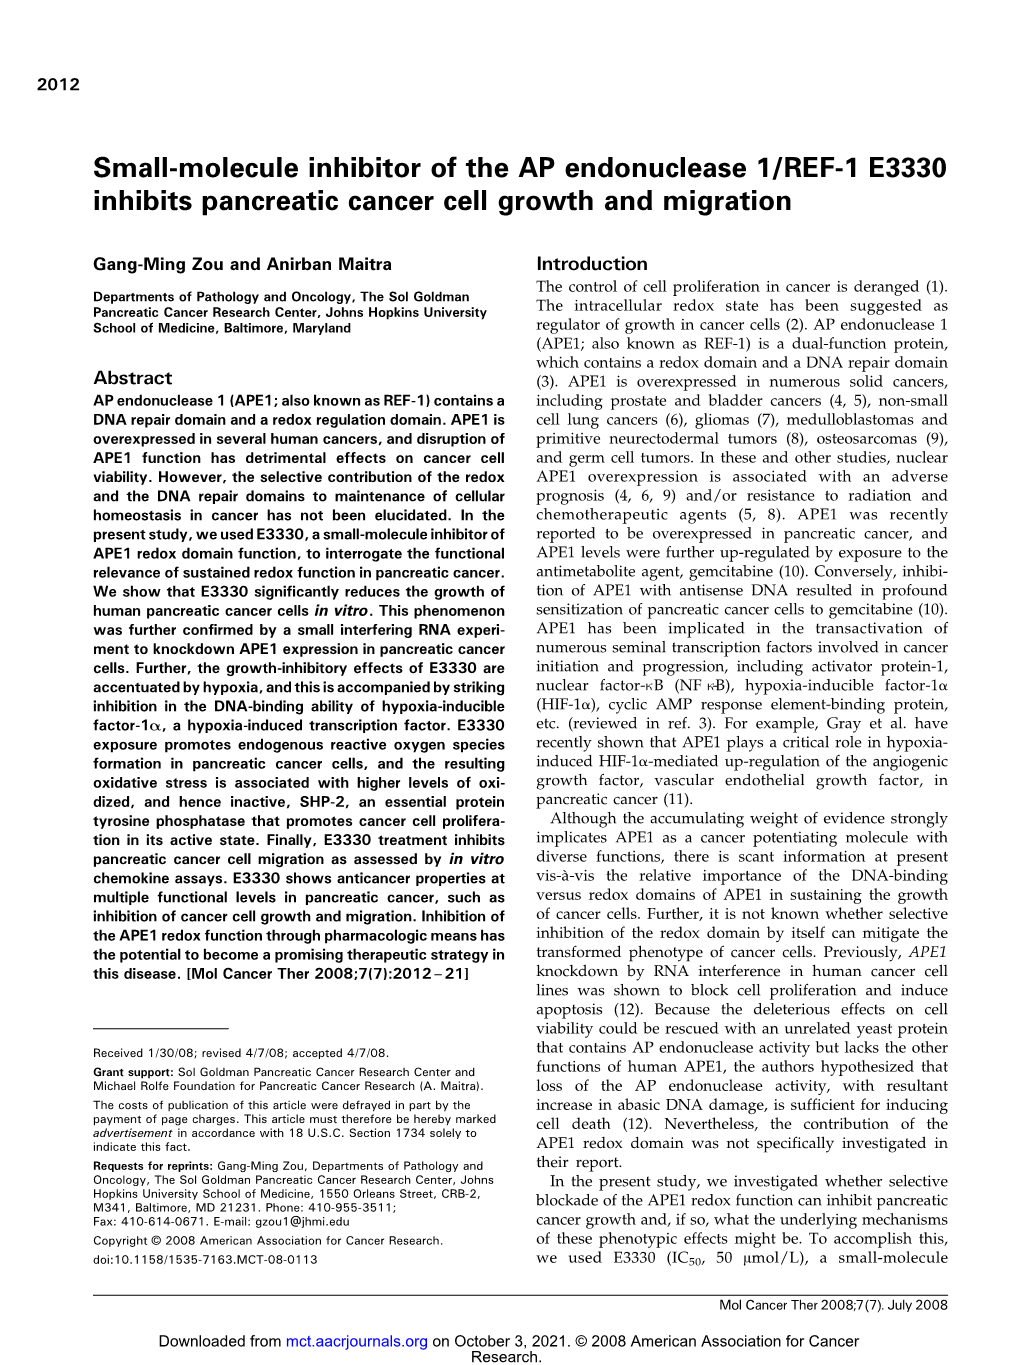 Small-Molecule Inhibitor of the AP Endonuclease 1/REF-1 E3330 Inhibits Pancreatic Cancer Cell Growth and Migration